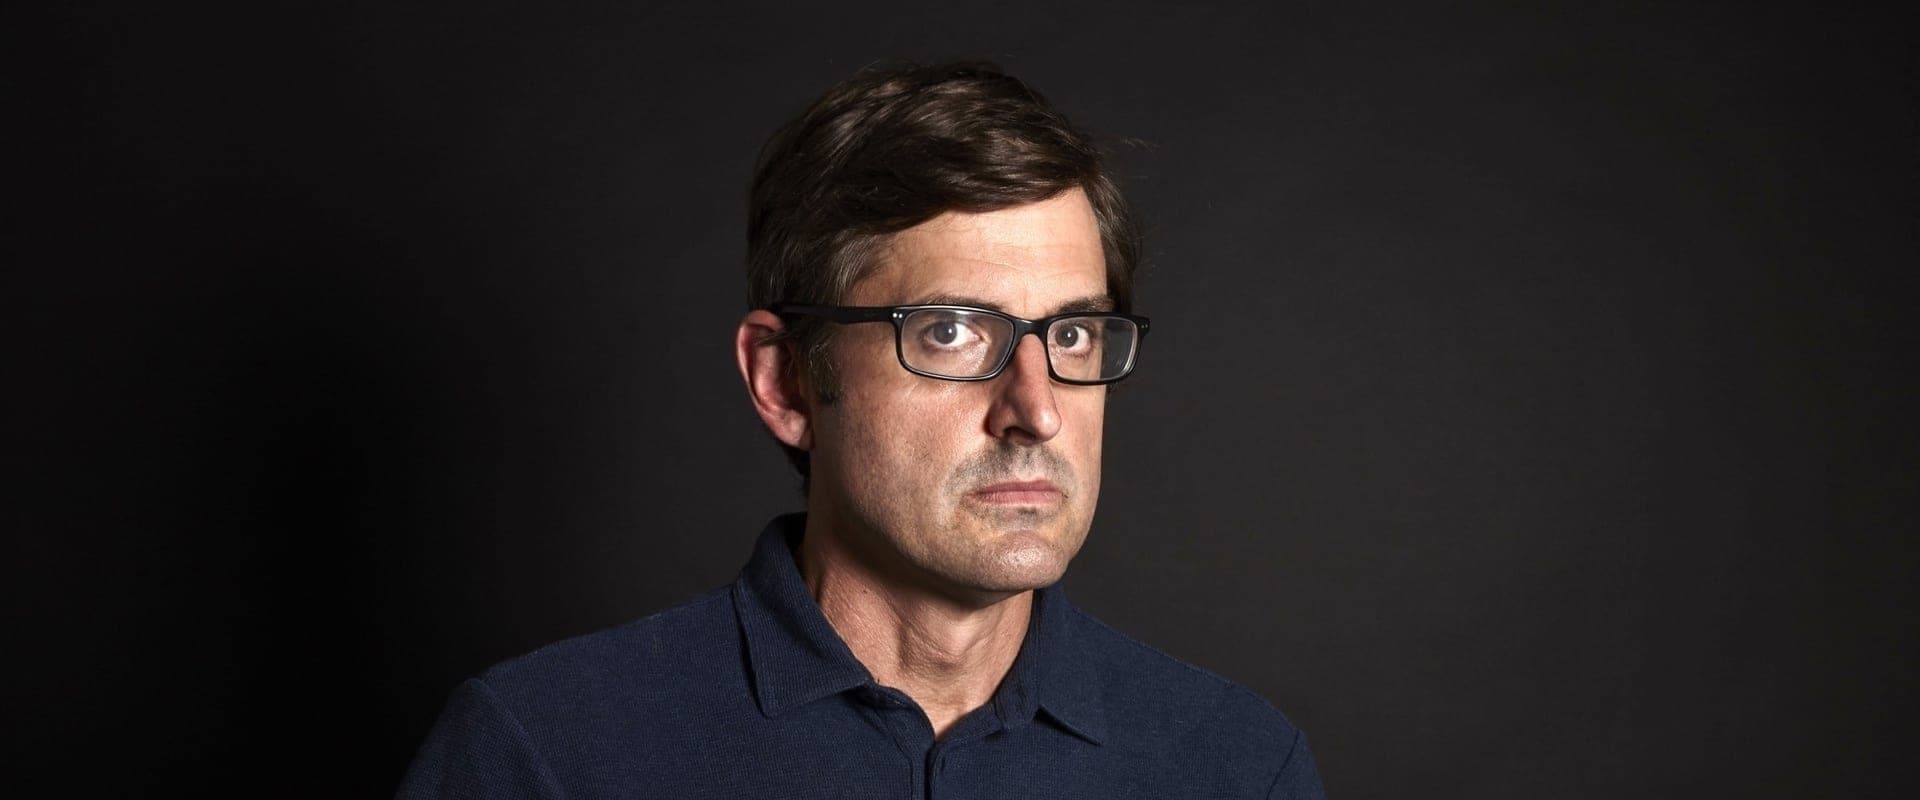 Louis Theroux: A Place for Paedophiles